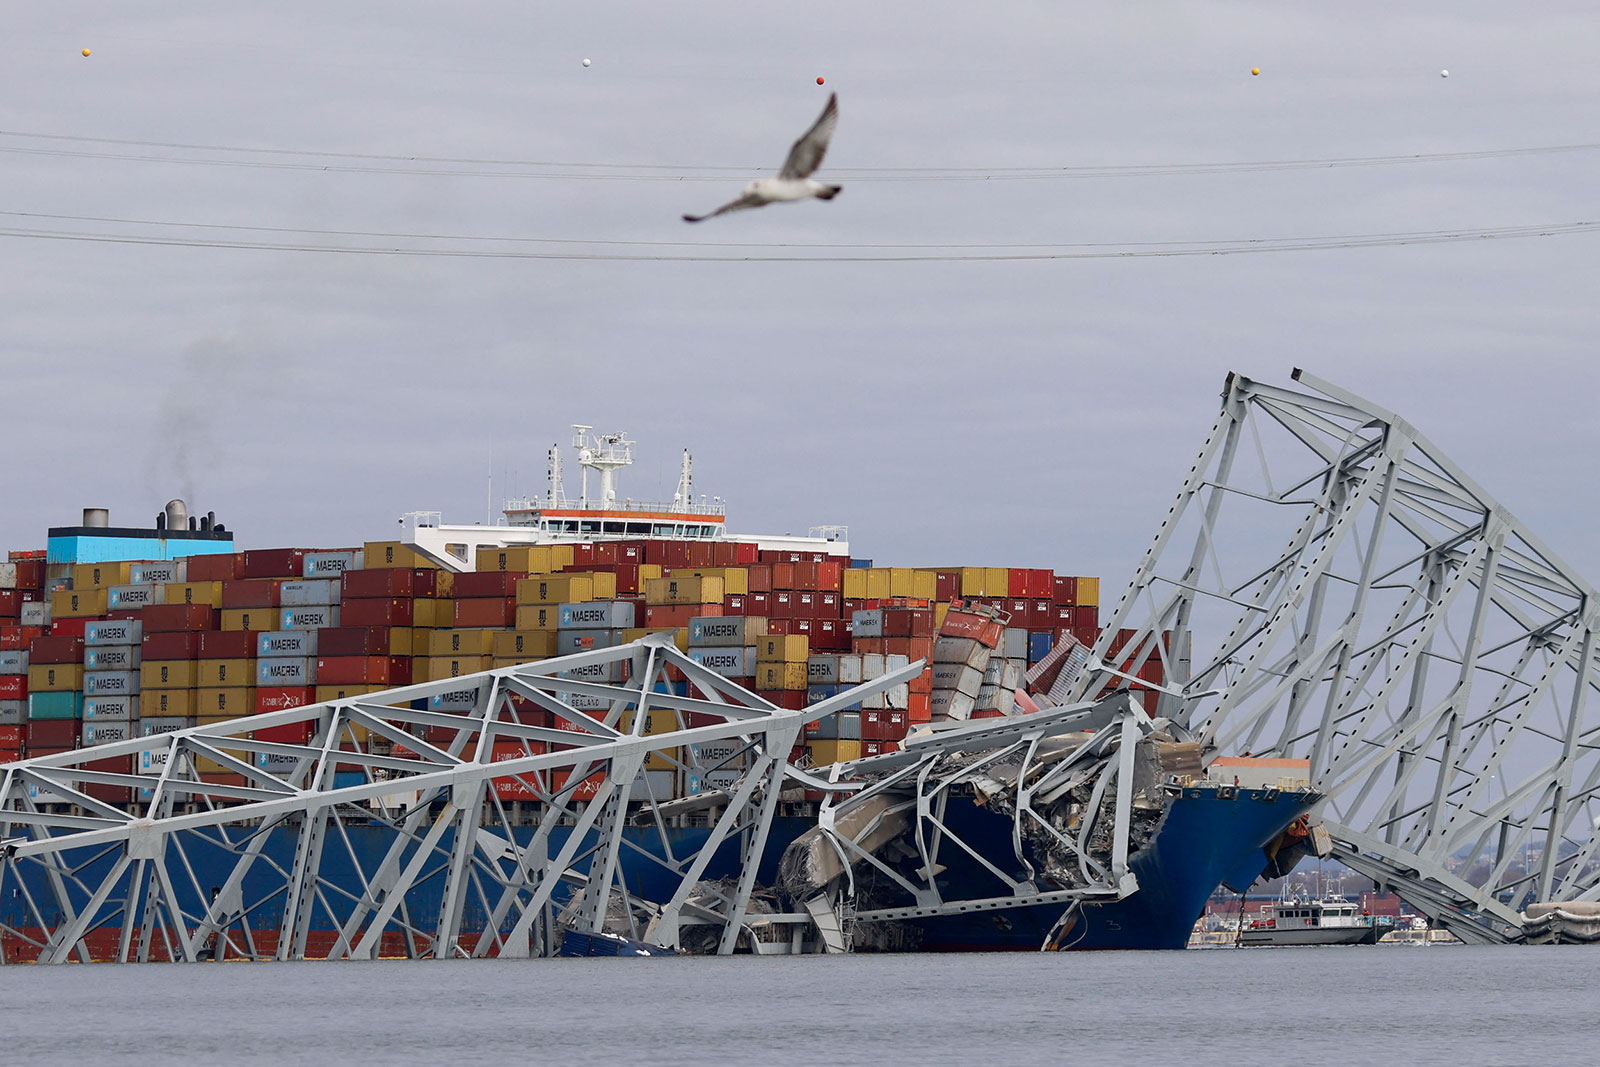 The Dali cargo ship is seen after crashing into the Francis Scott Key Bridge causing it to collapse in Baltimore, Maryland, on Tuesday. 